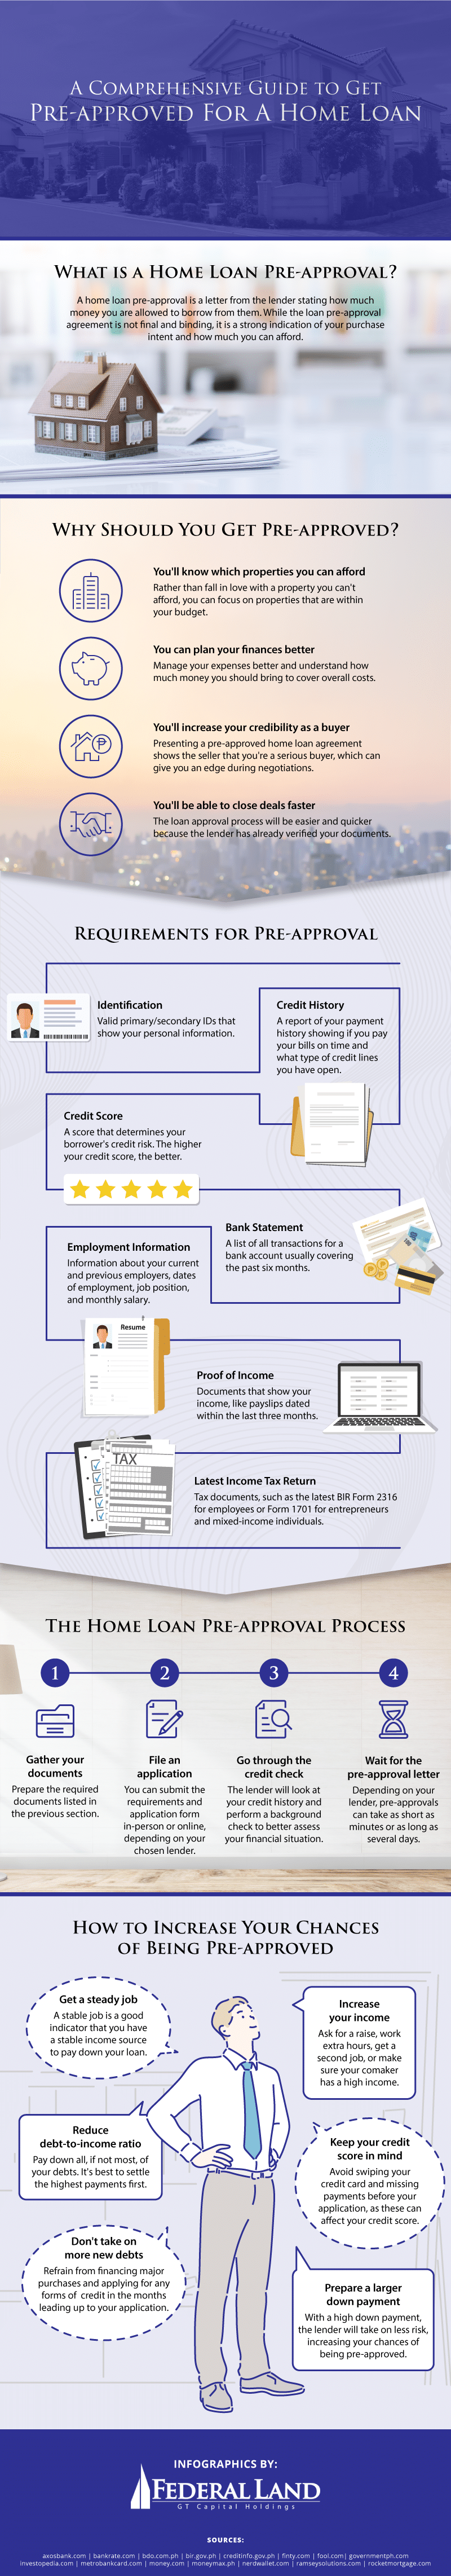 A Comprehensive Guide to Get Pre-approved for a Home Loan Infographic 